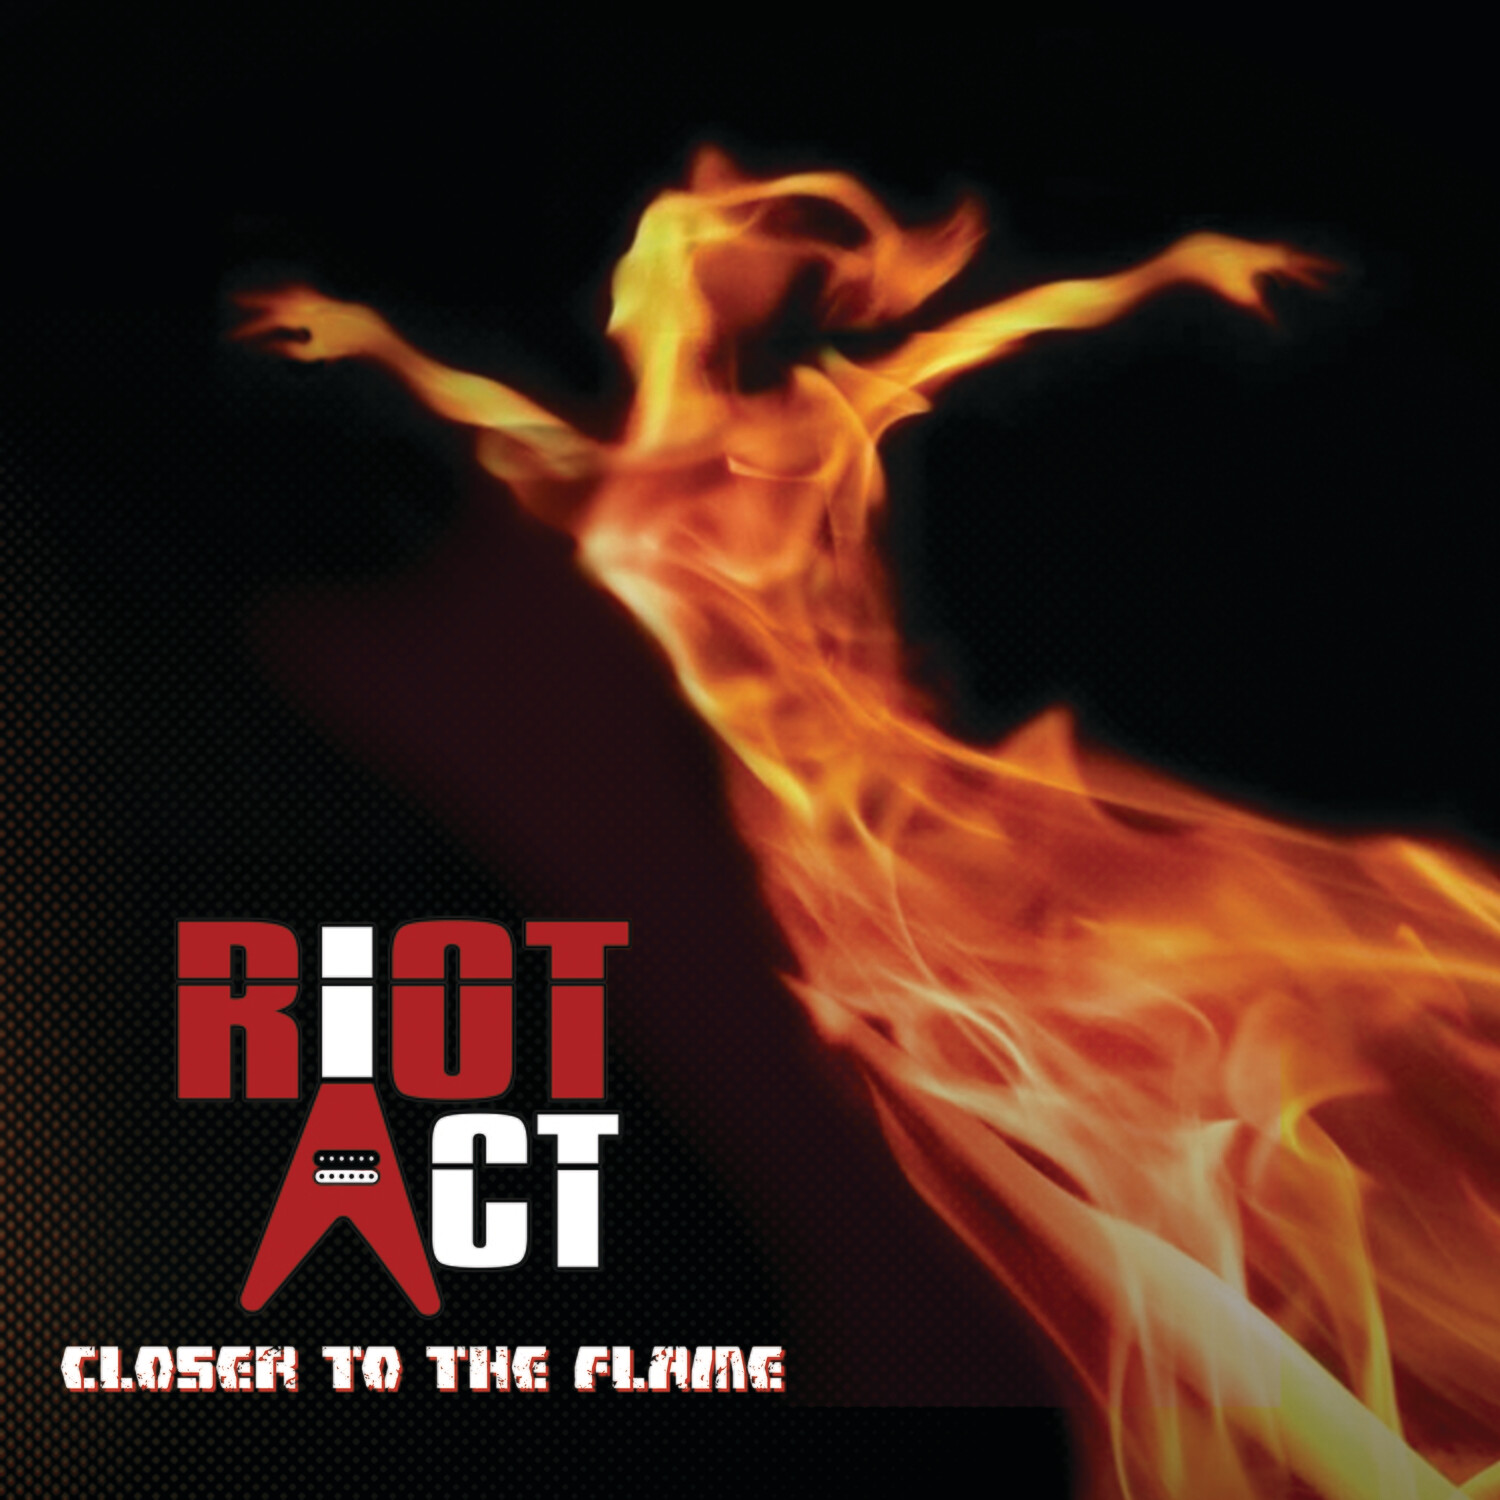 Riot Act - Closer To The Flame, 
Comes with a limited Signed Card for the first 200 copies.